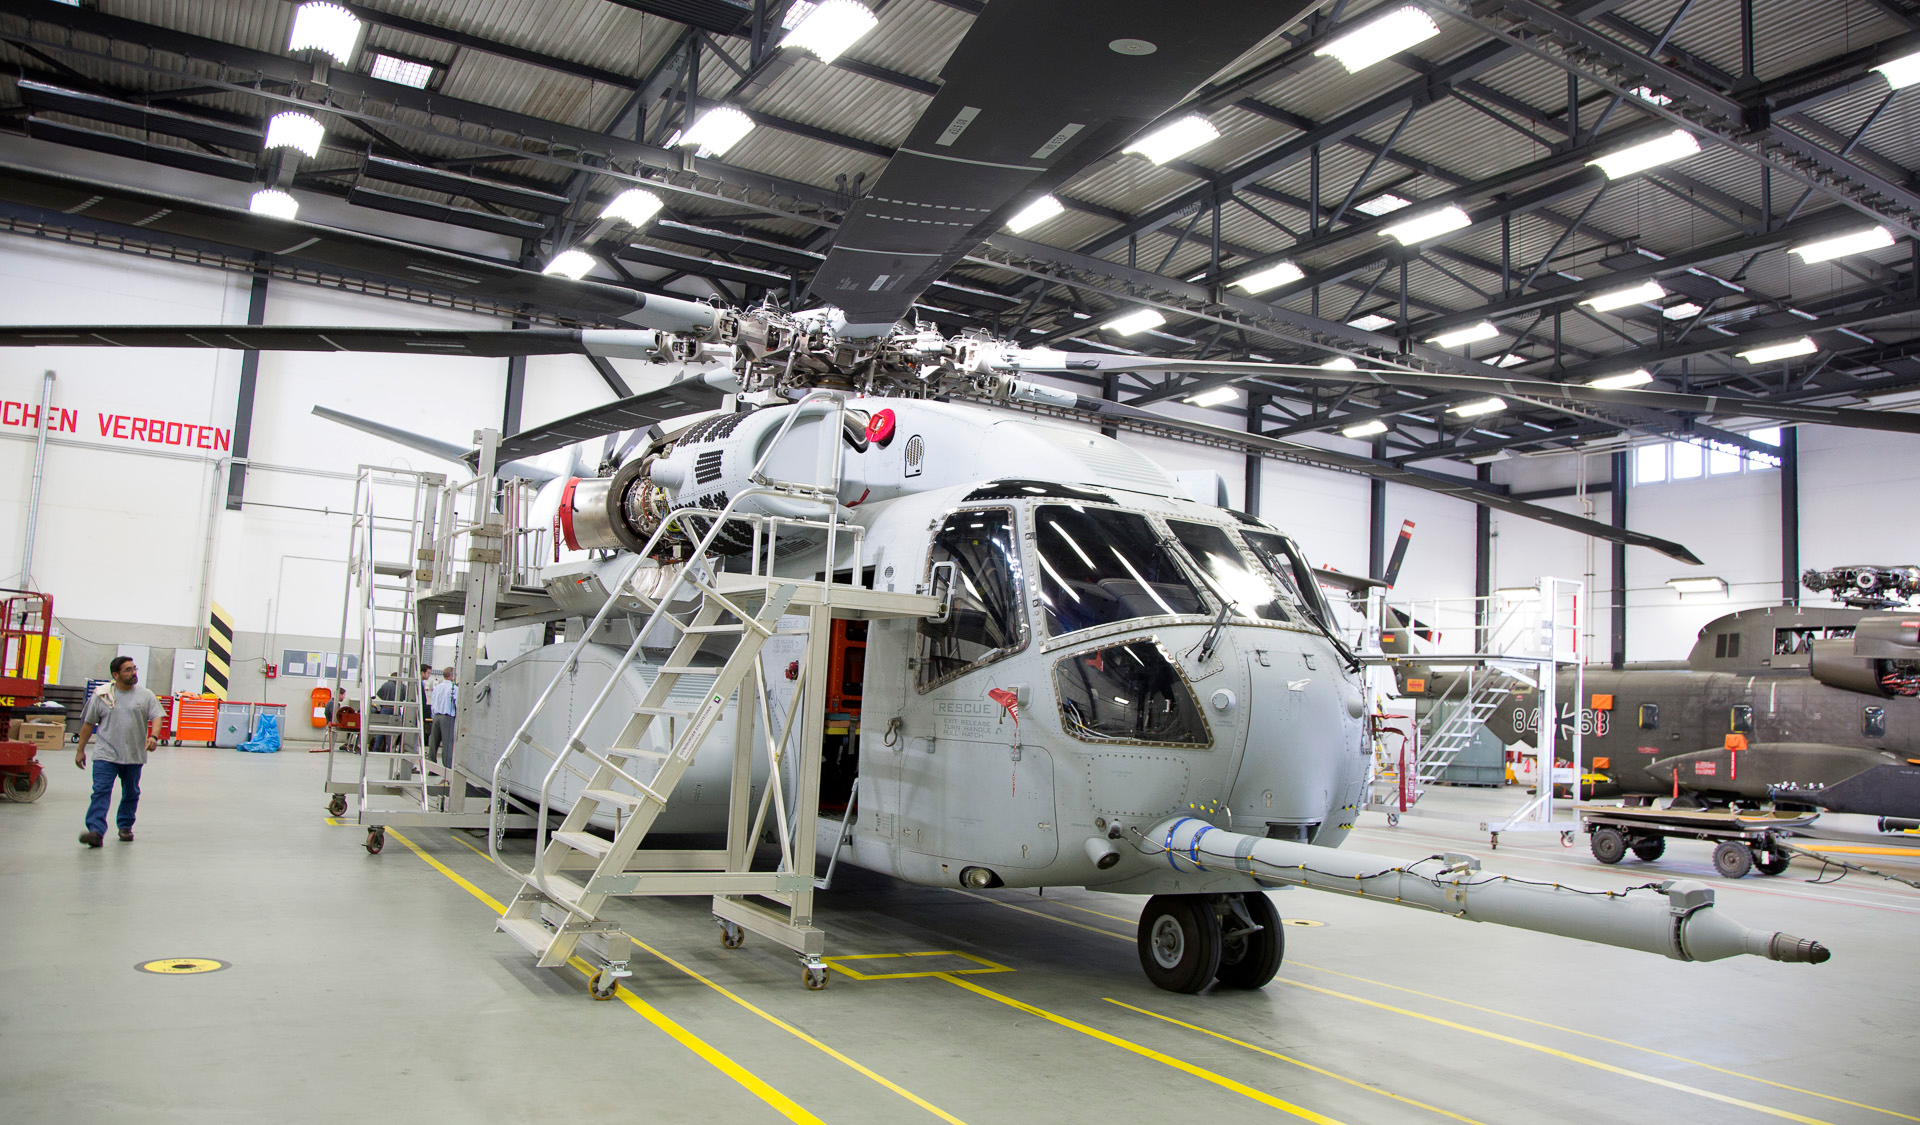 The Sikorsky CH-53K in Germany’s existing infrastructure at Holzdorf Airbase, utilizing existing ground support equipment next to the legacy CH-53G aircraft.